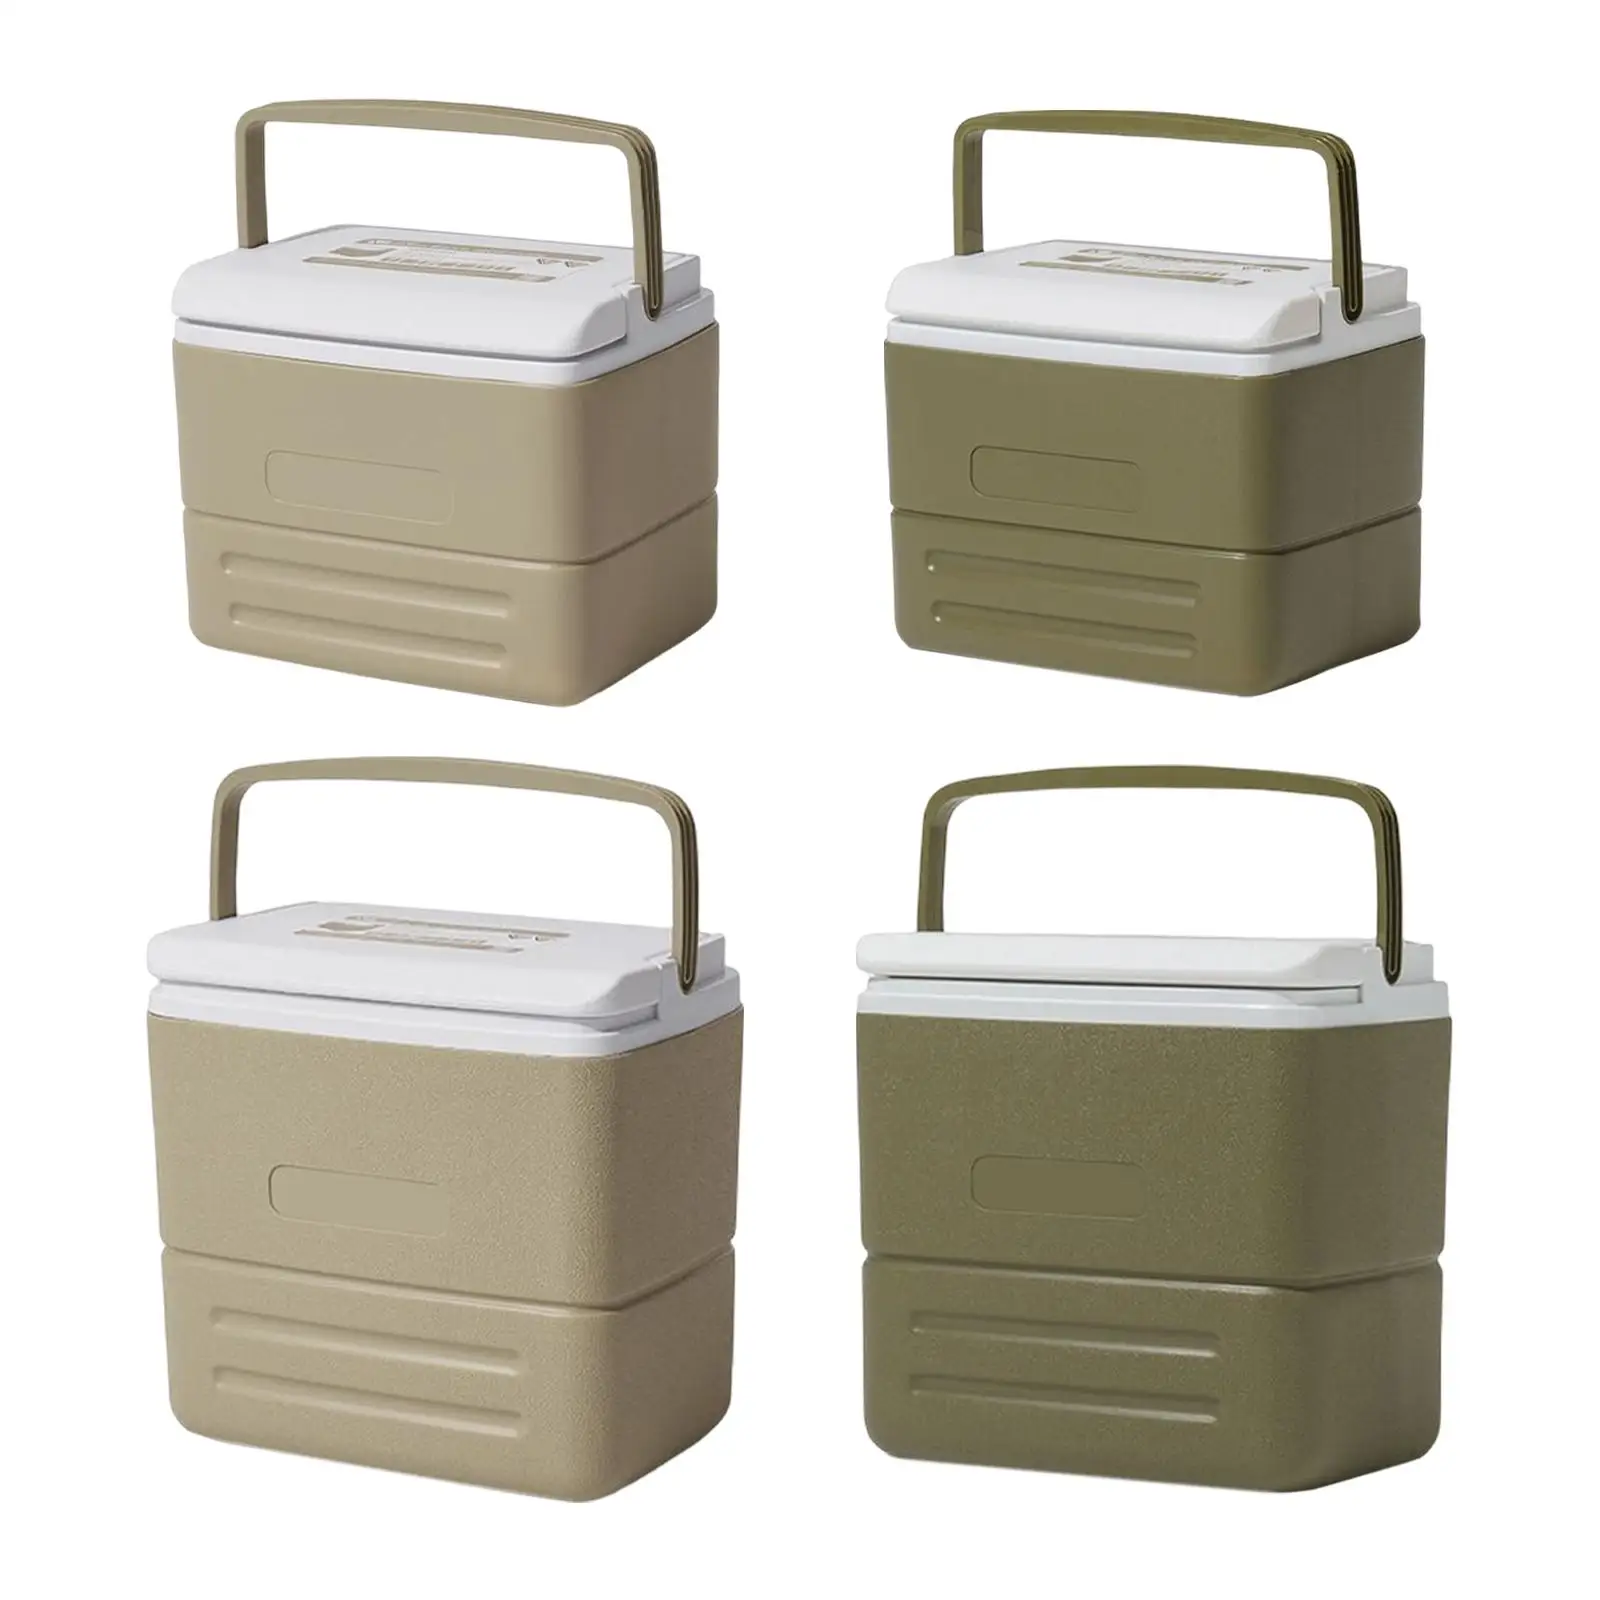 Cooler Bag Food Warm Fridge Catering Therma Refrigerator Storage Insulated Thermal for Shipping BBQ Family Van Boat